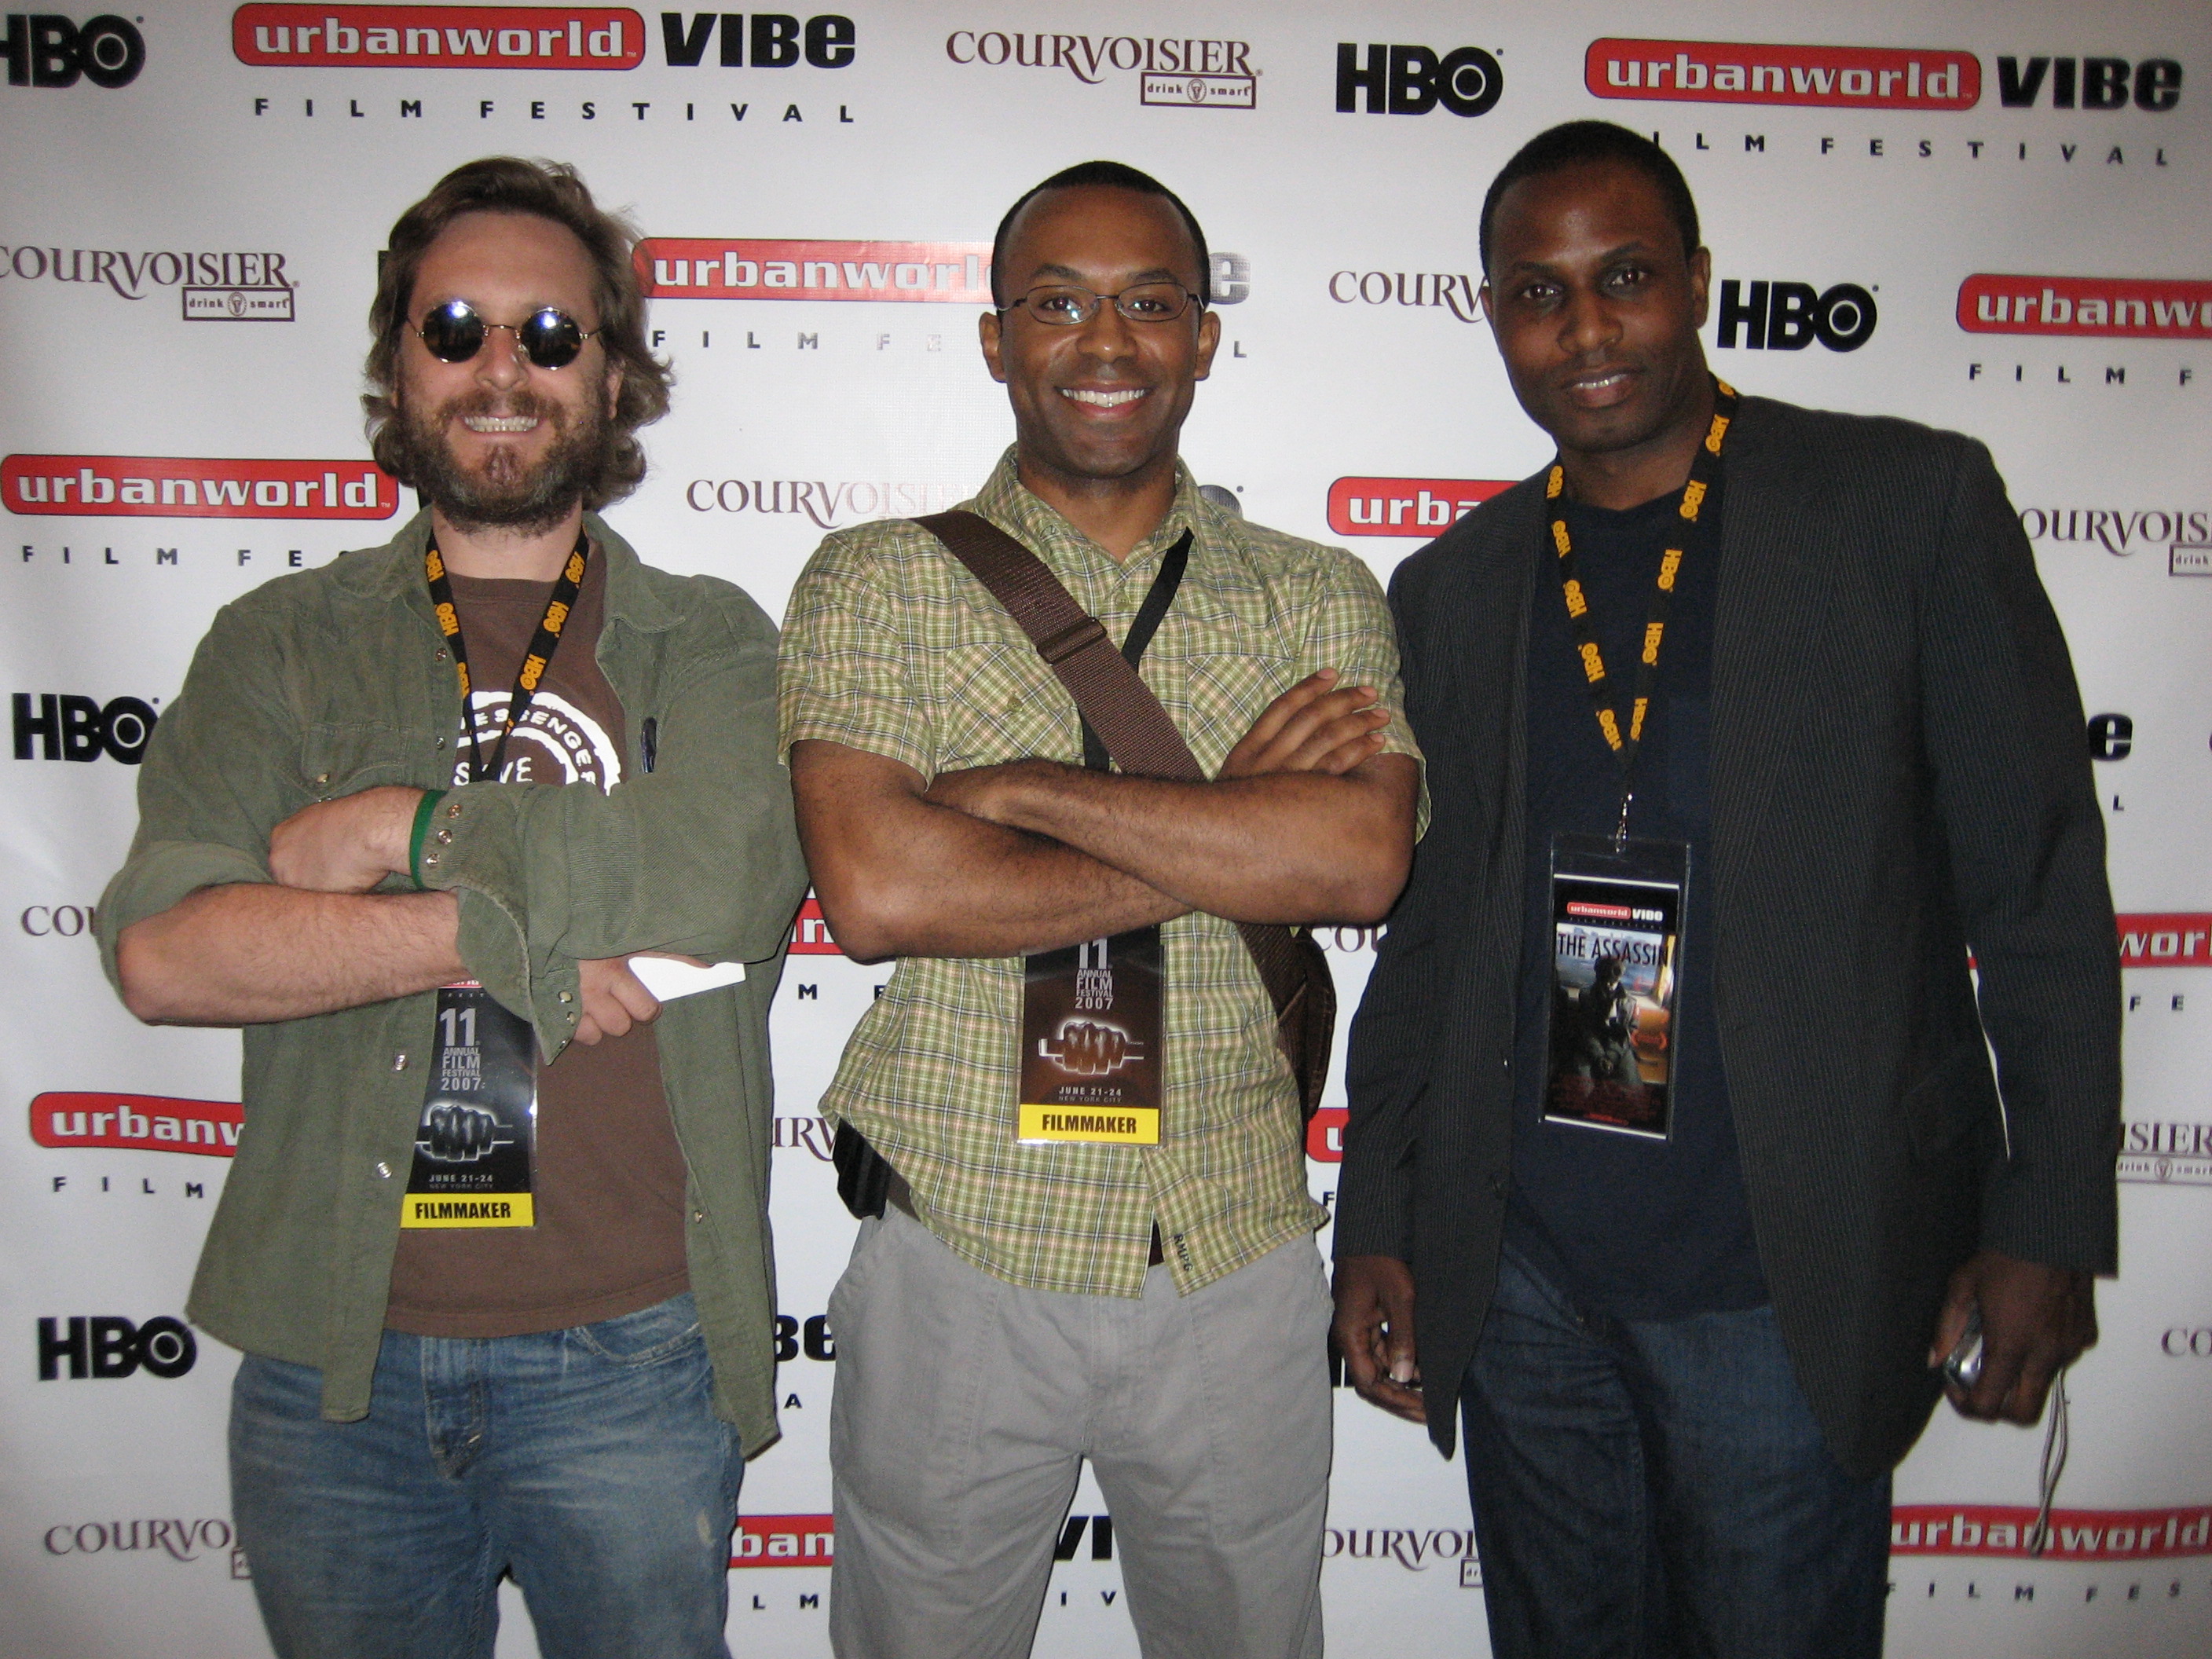 2007 Urbanworld VIBE Film Festival with Josh Wick and Kevin Craig West.